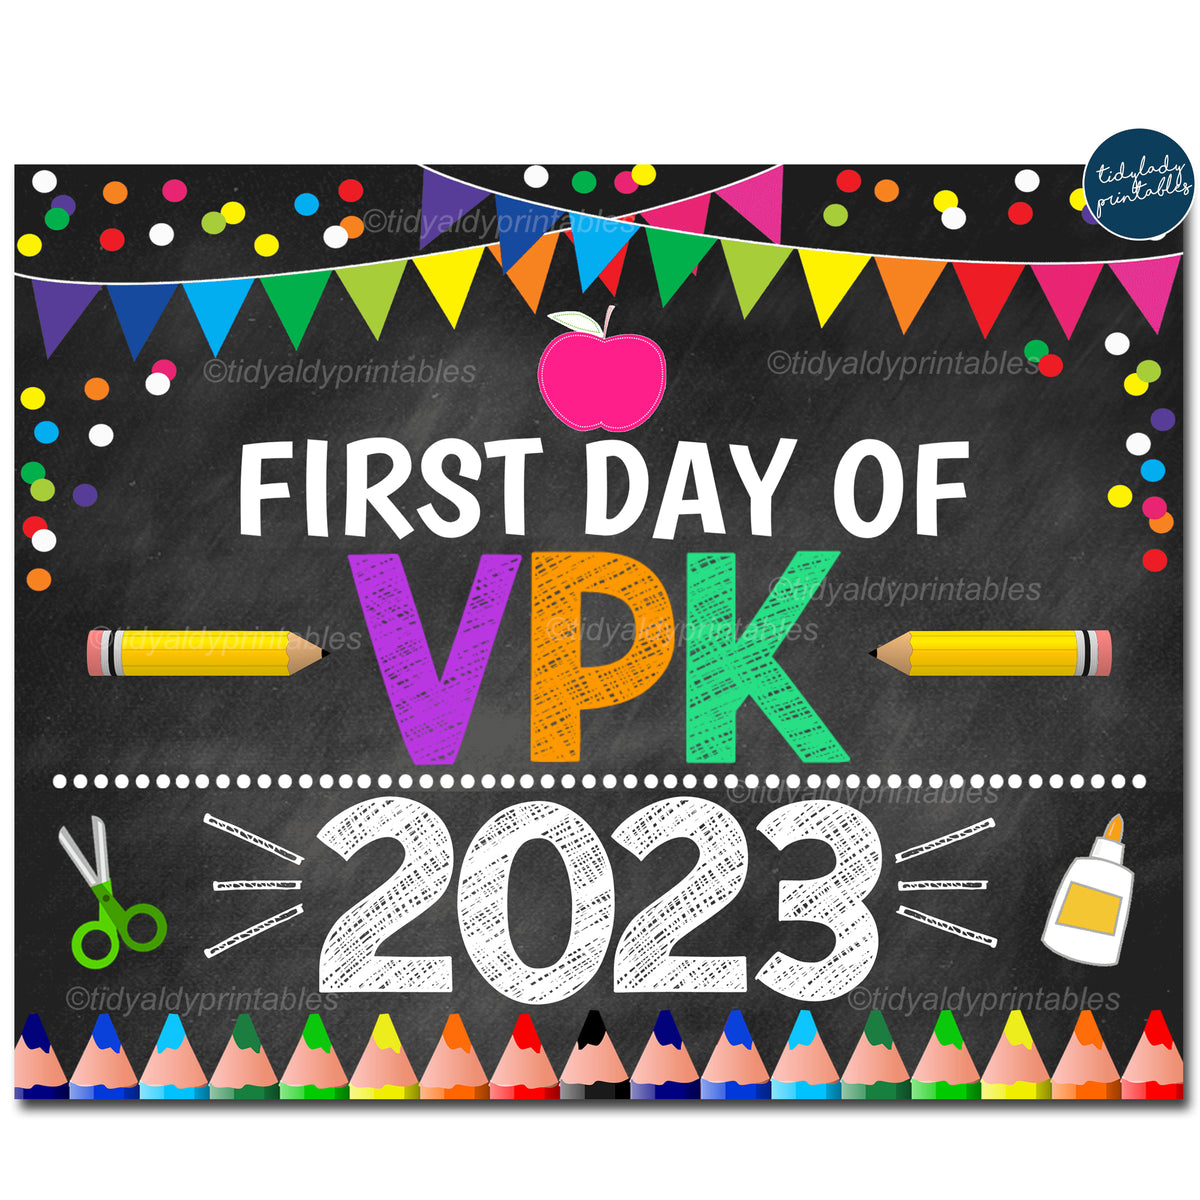 First Day Of Vpk Sign Printable